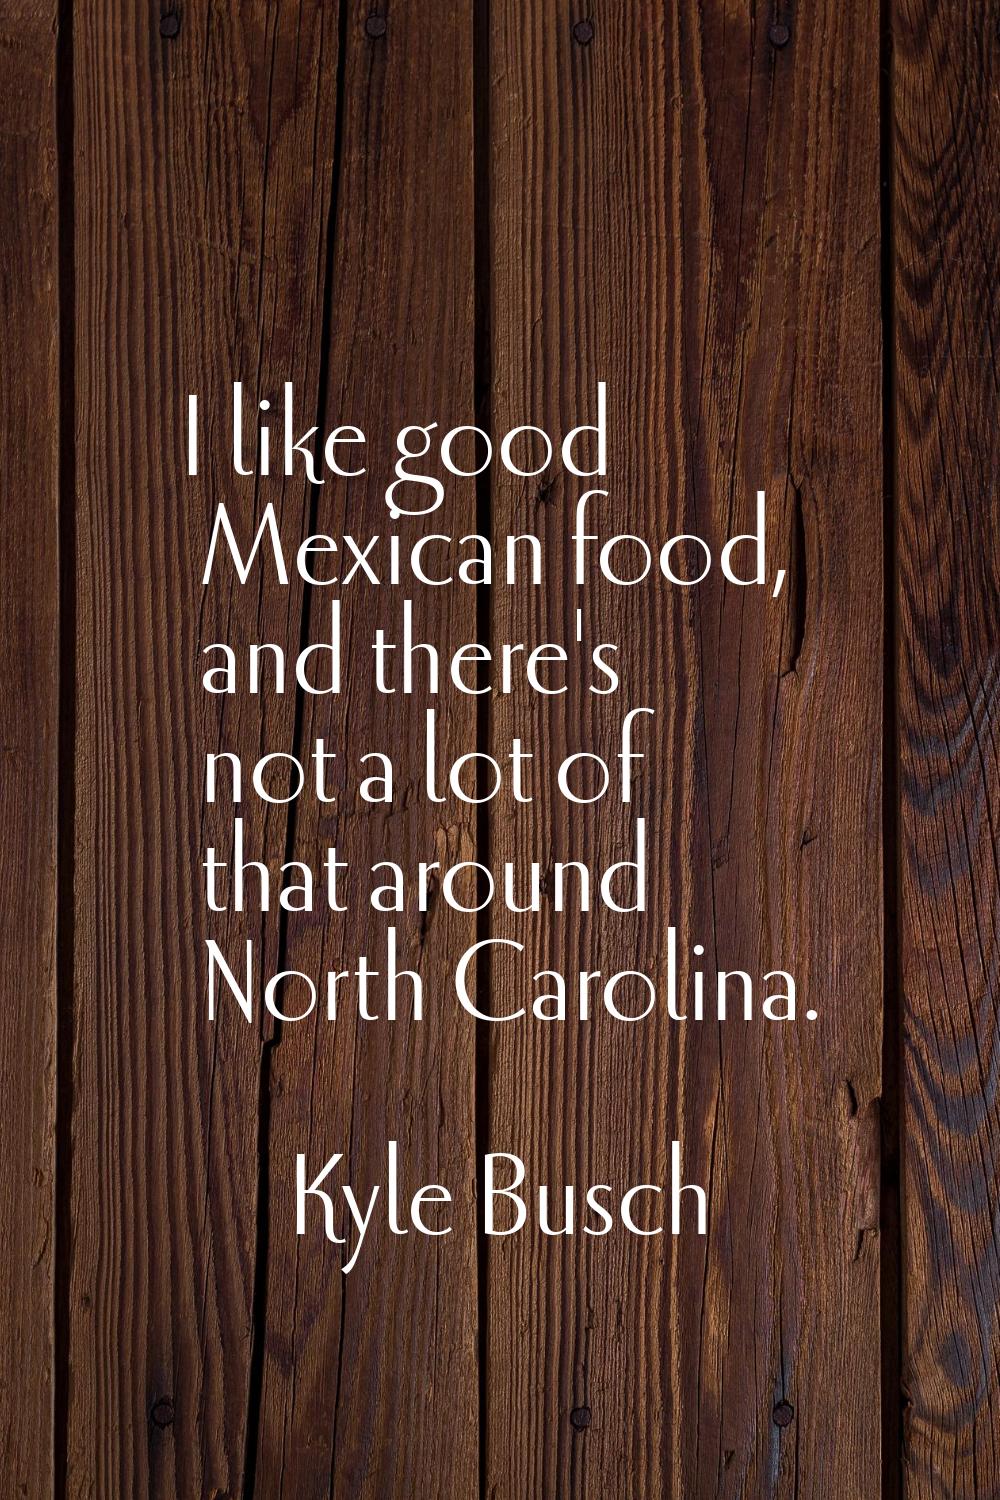 I like good Mexican food, and there's not a lot of that around North Carolina.